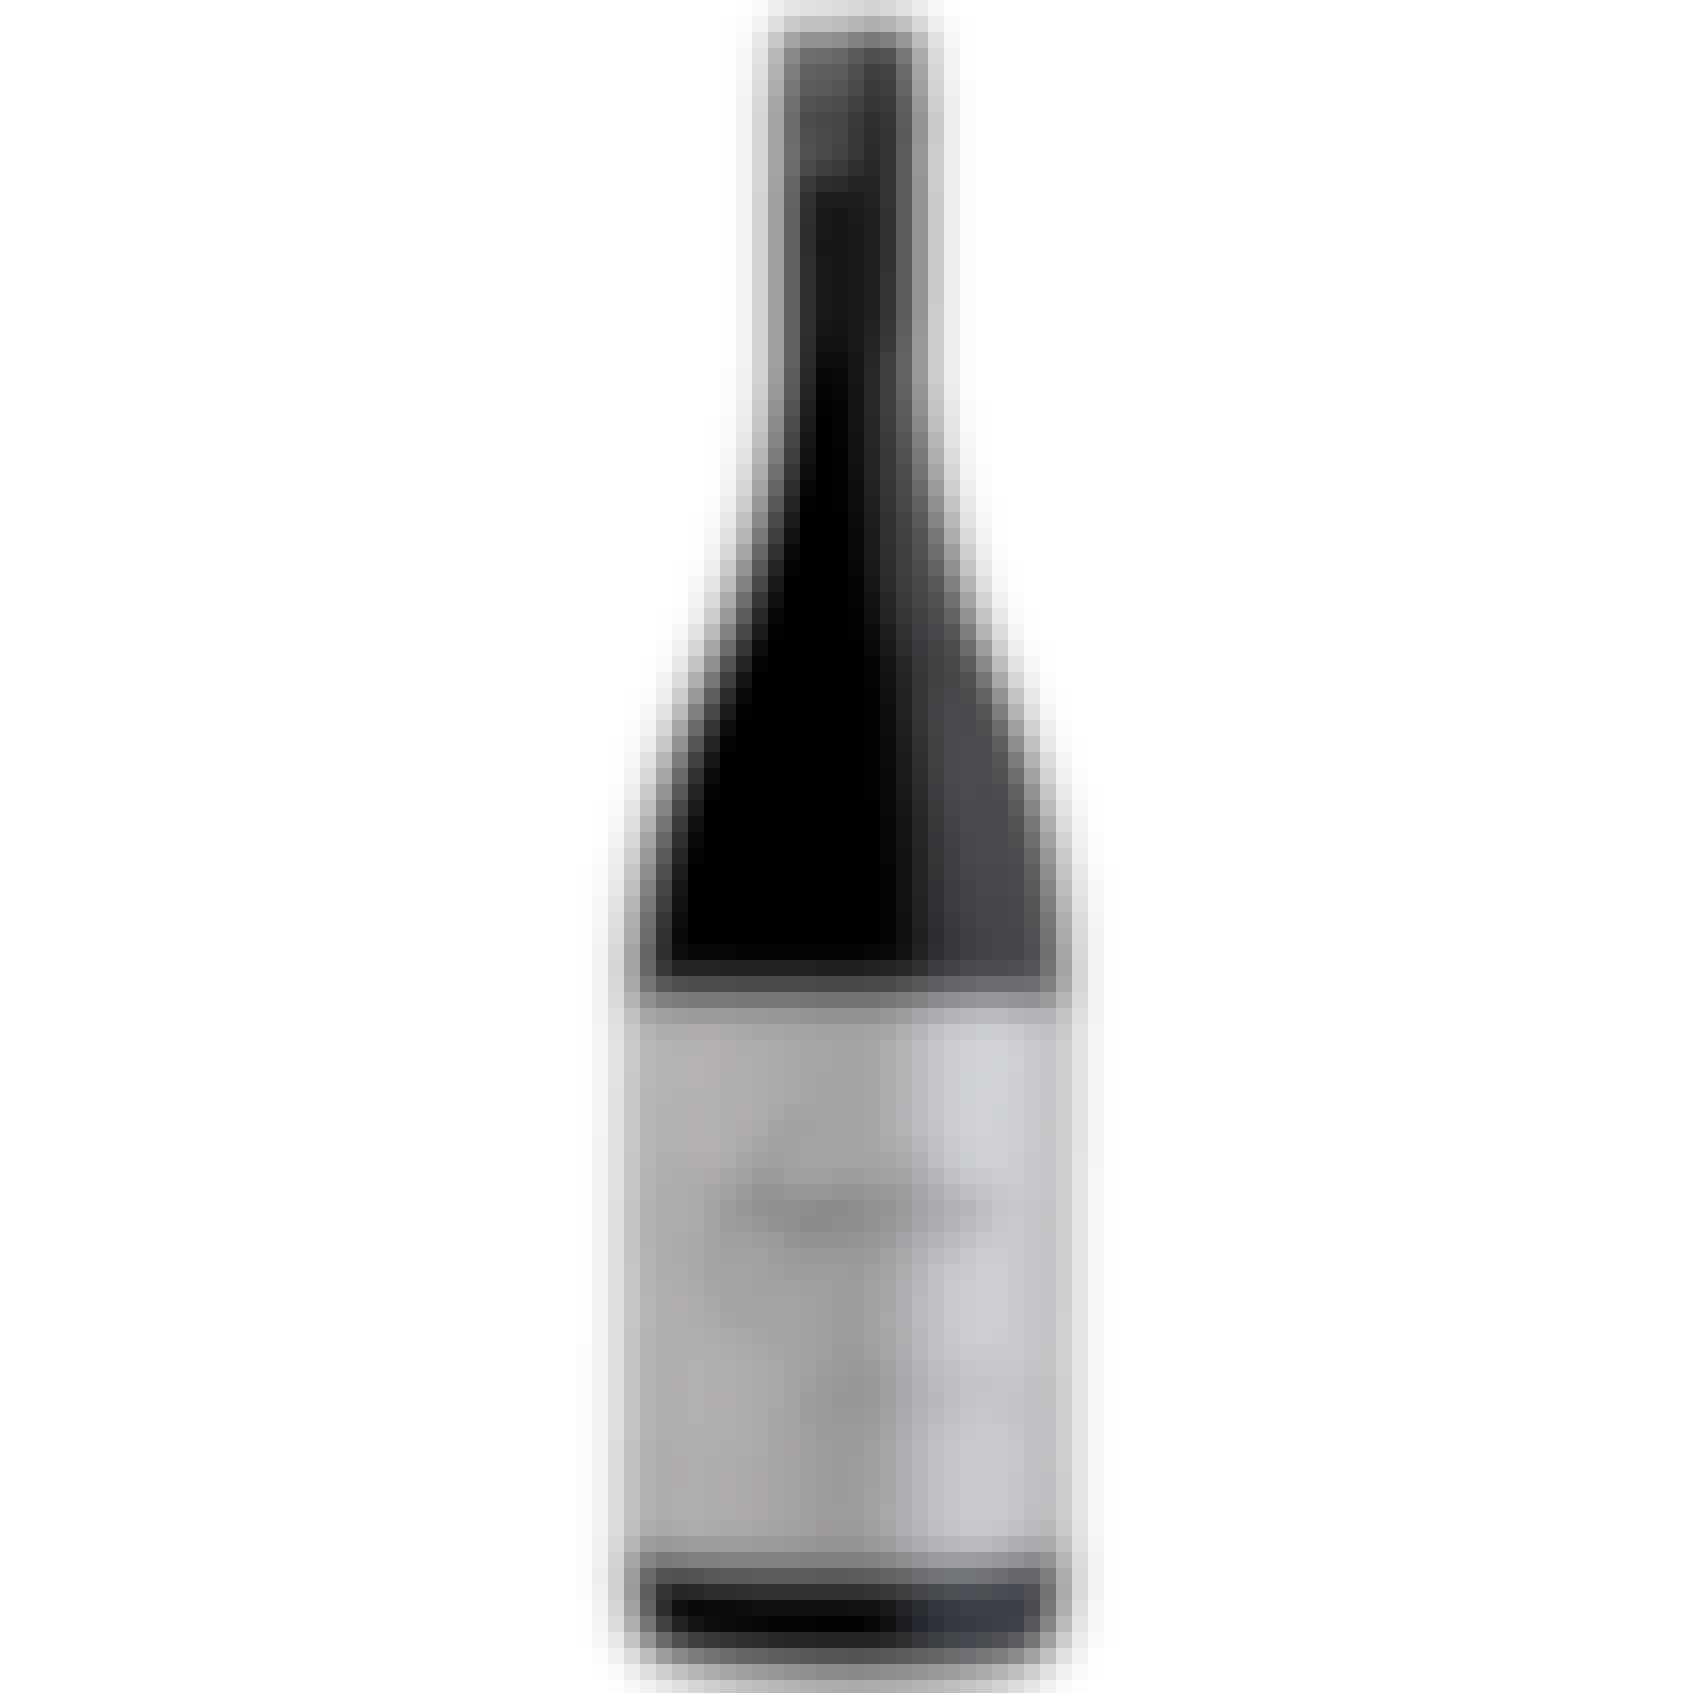 Angeline Russian River Valley Pinot Noir VNS 750ml